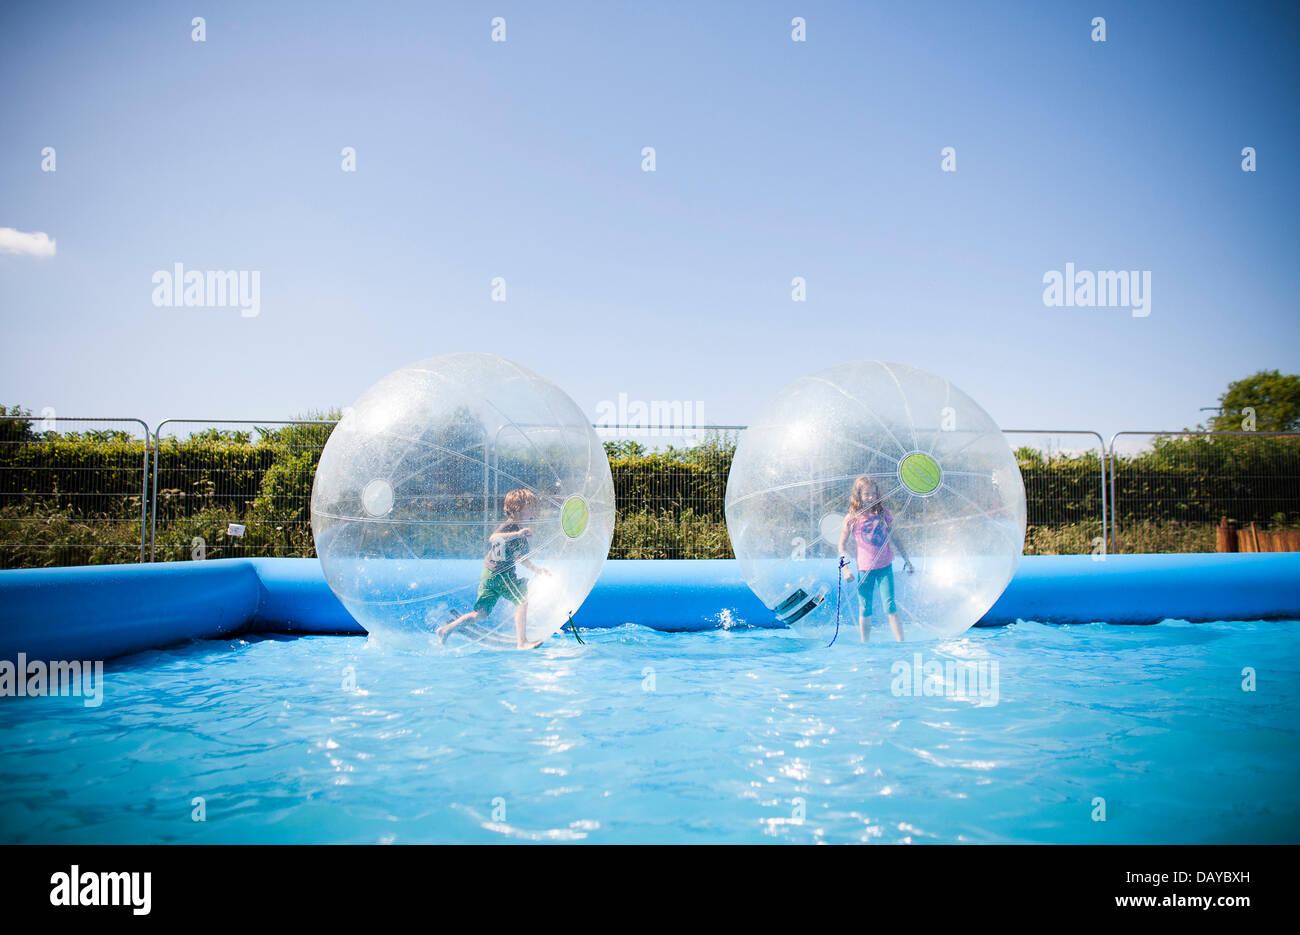 Oakhampton, UK. 20th July, 2013. People play in Zorb balls in a pool at Chagstock, a small music festival near Okehampton, Devon. The sold out event saw festival goers enjoying the hot, sunny weather that has basked the UK recently. The Met Office has downgraded the heatwave warning level but temperatures are expected to rise again during the next week. 20 July 2013 Credit:  Adam Gasson/Alamy Live News Stock Photo